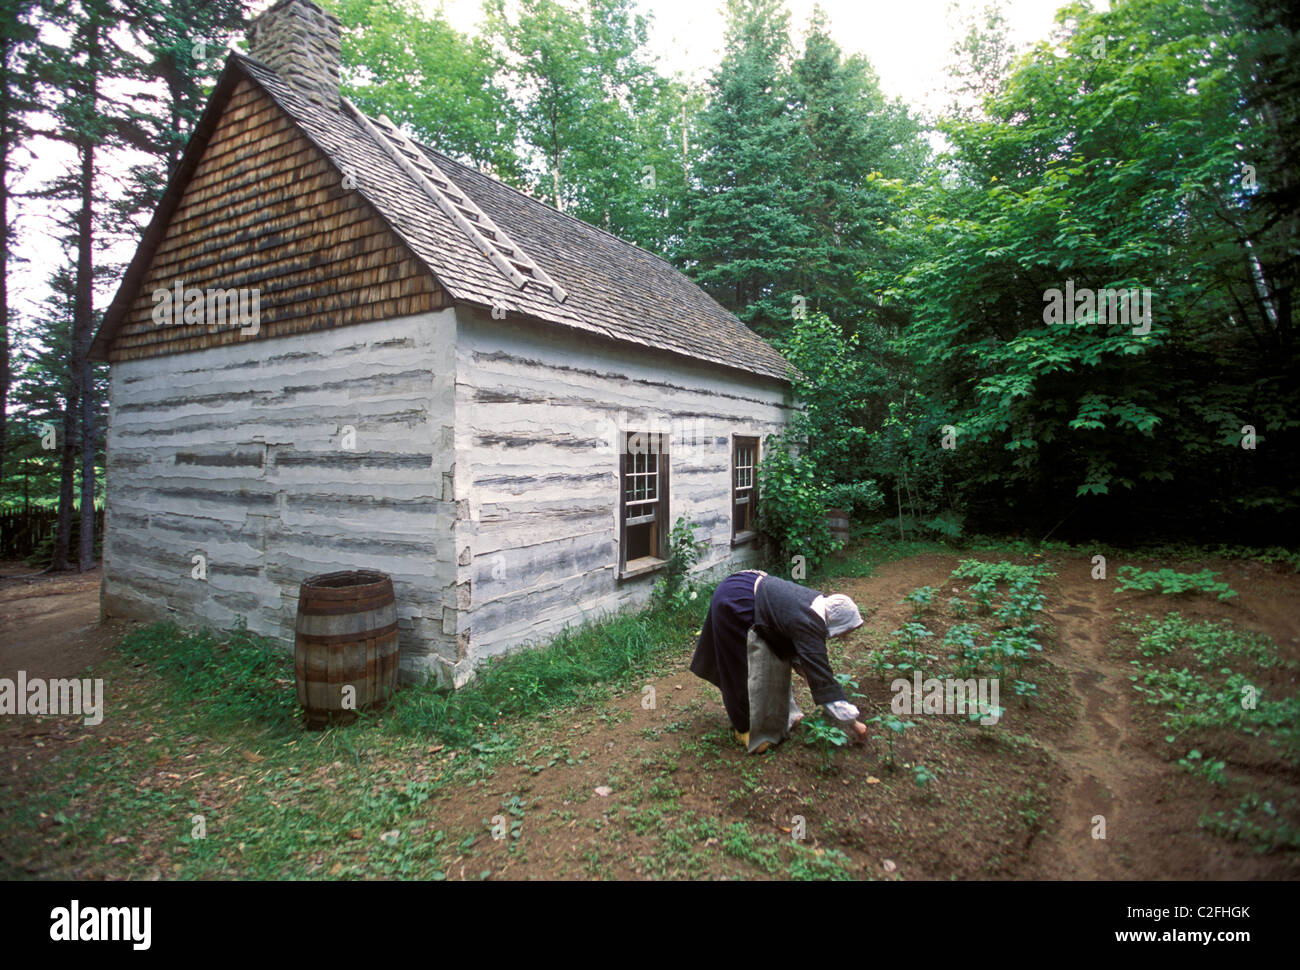 1, one, Canadian woman, weeding garden, wearing period costume, Acadian Historical Village, near town of Caraquet, New Brunswick Province, Canada Stock Photo